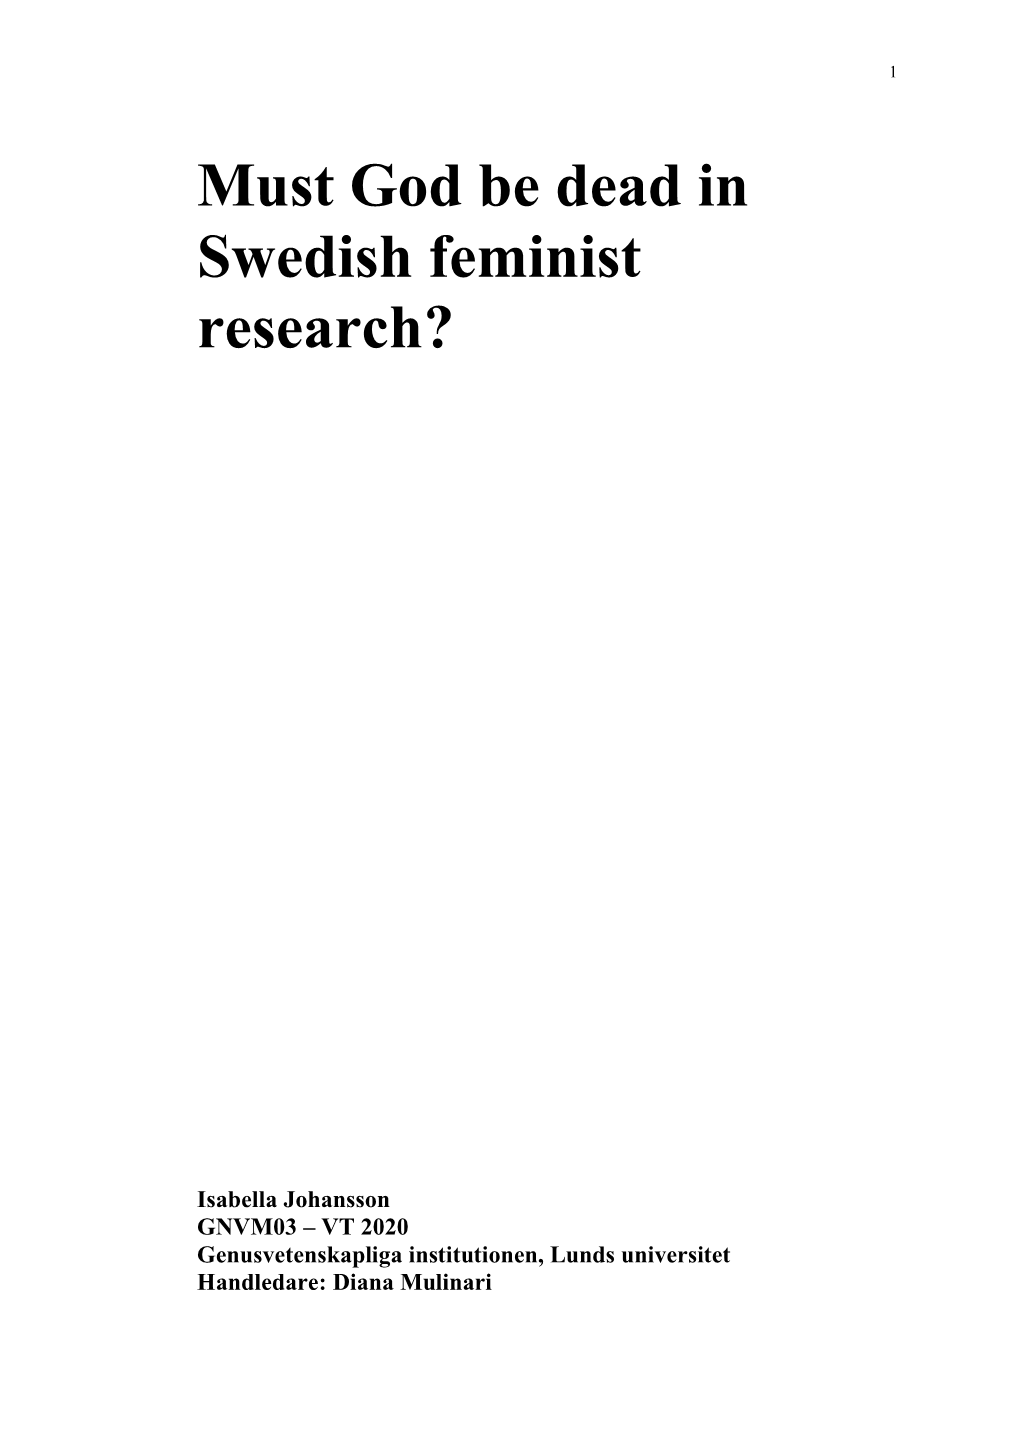 Must God Be Dead in Swedish Feminist Research?